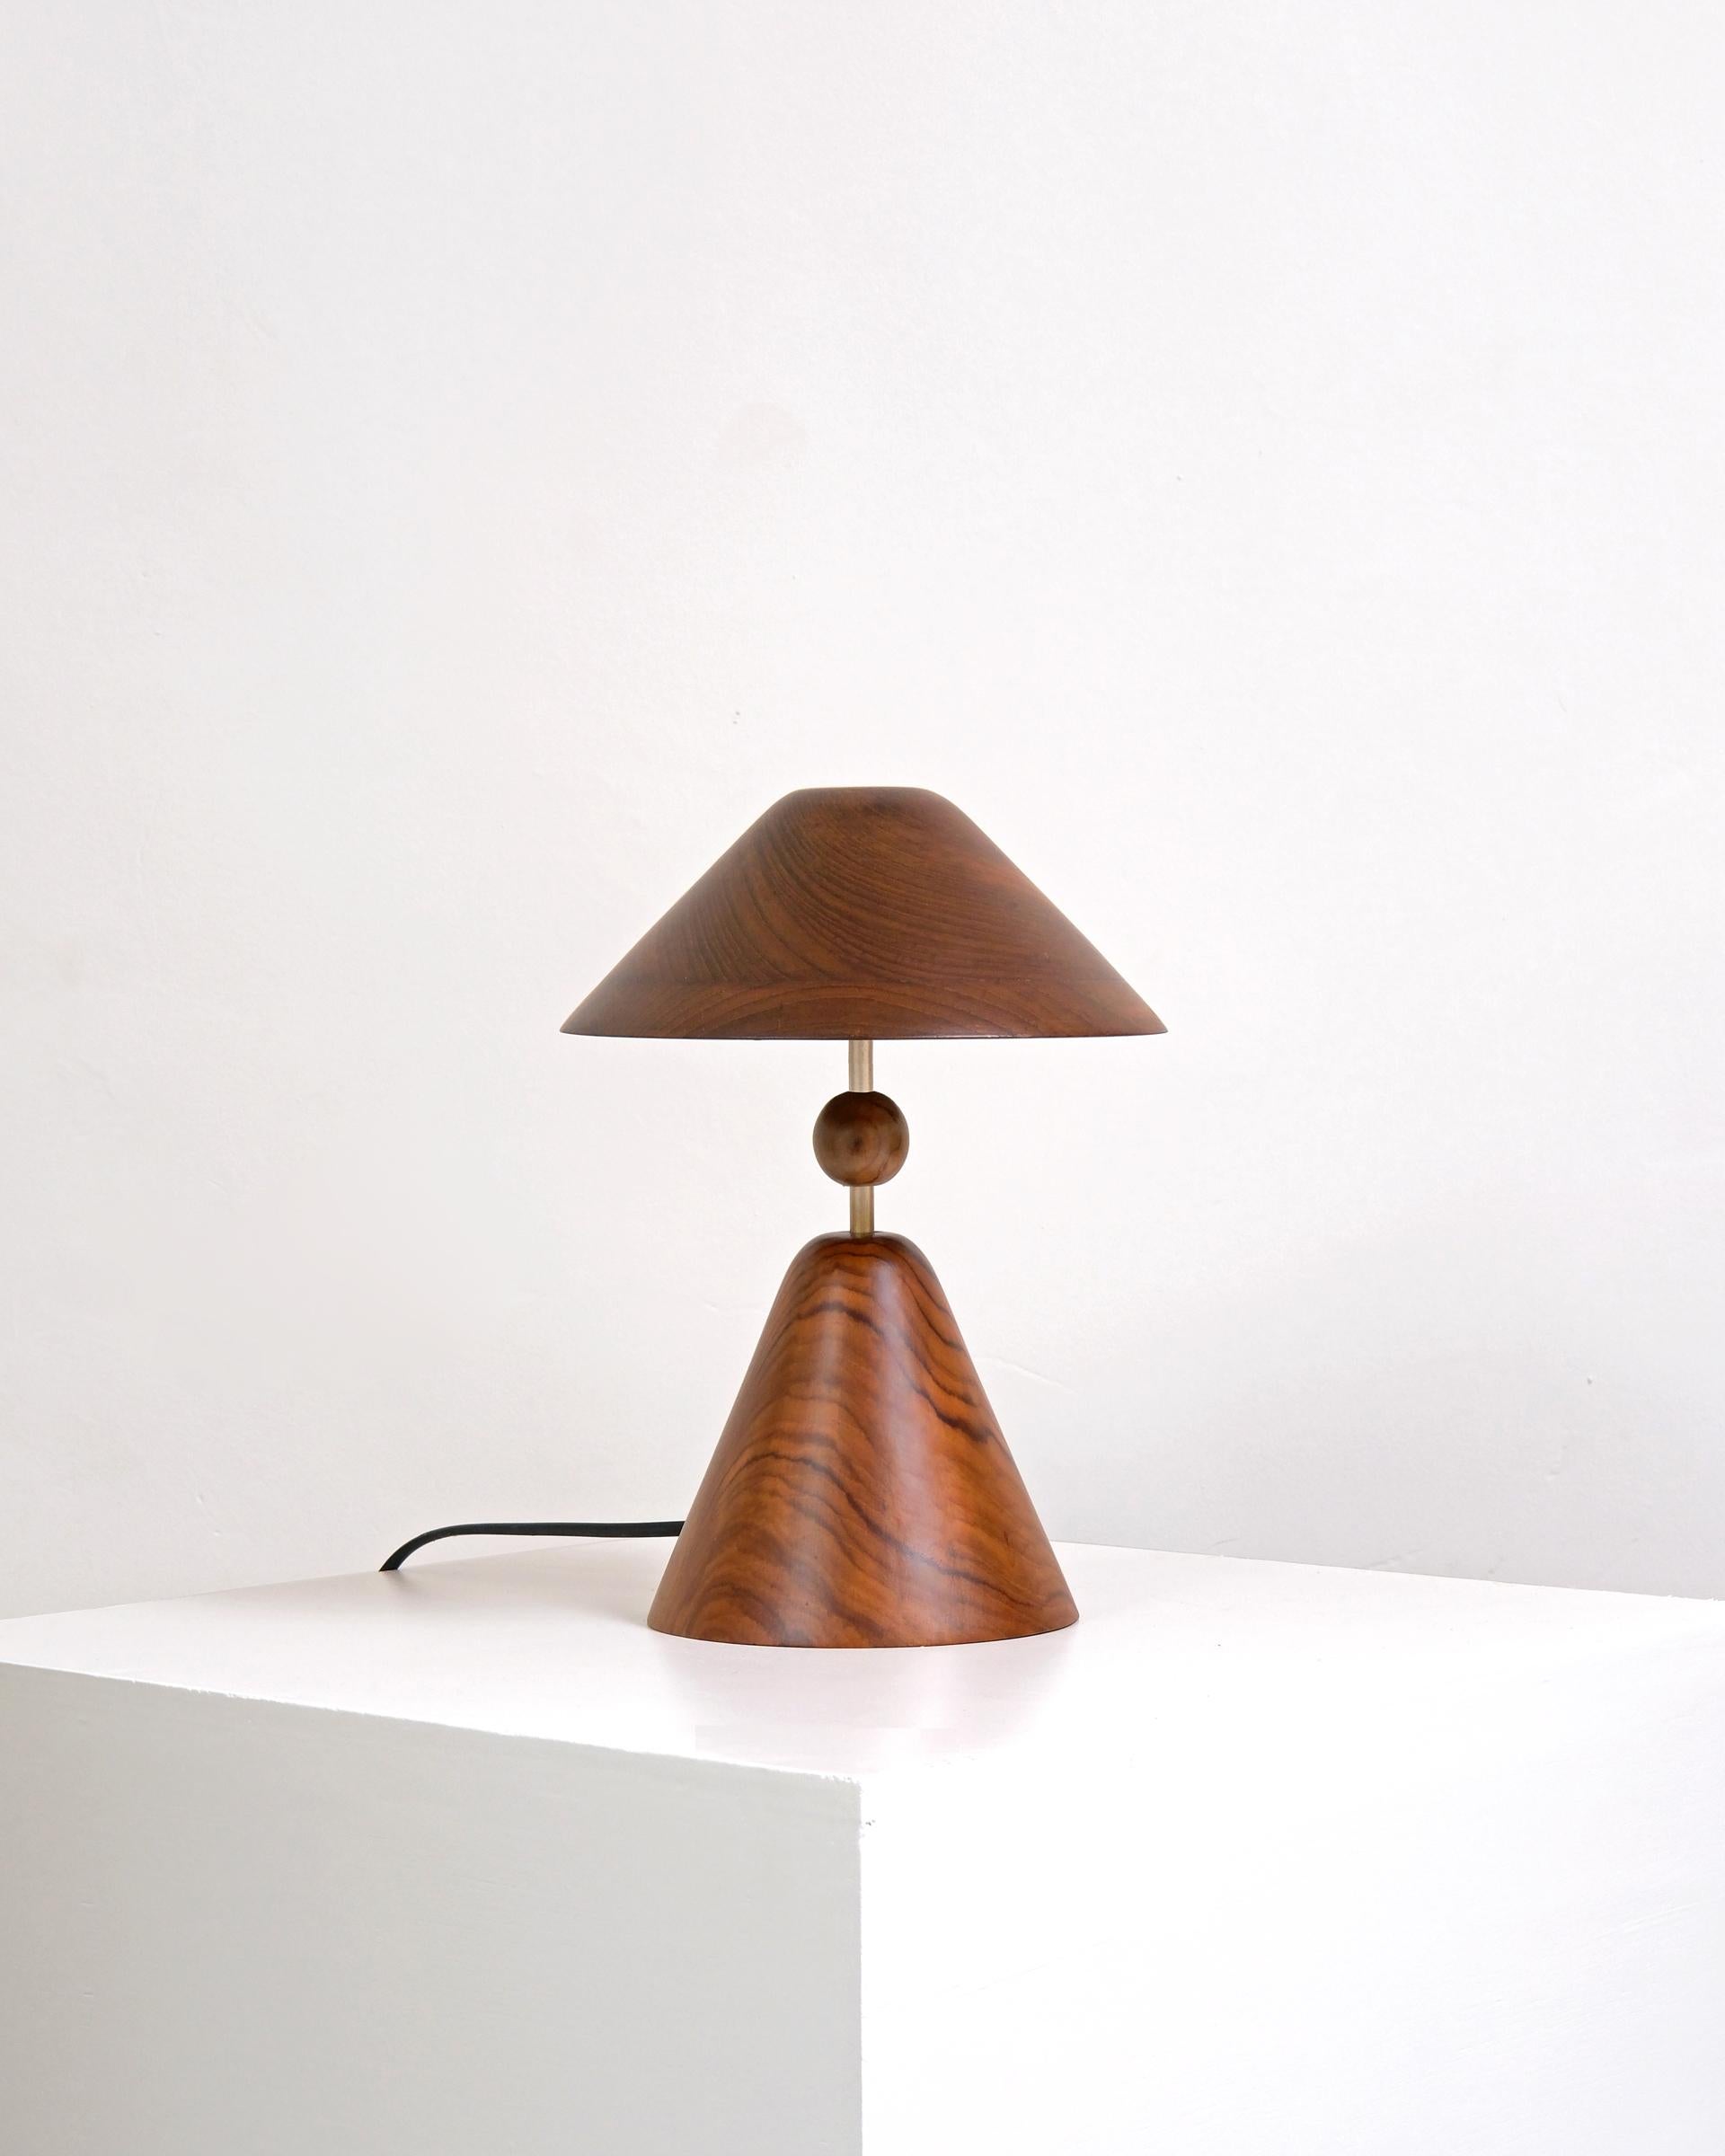 Nuit Table Lamp by Studio Indigene
Dimensions: D 20.32 x W 20.32 x H 27.94 cm
Materials: Reclaimed Teak Wood, Brass.
Colors Brown, Natural Wooden, Brass Finish.

Echoing the archetypical form of a table lamp, Nuit sits in corners with a soft glow -